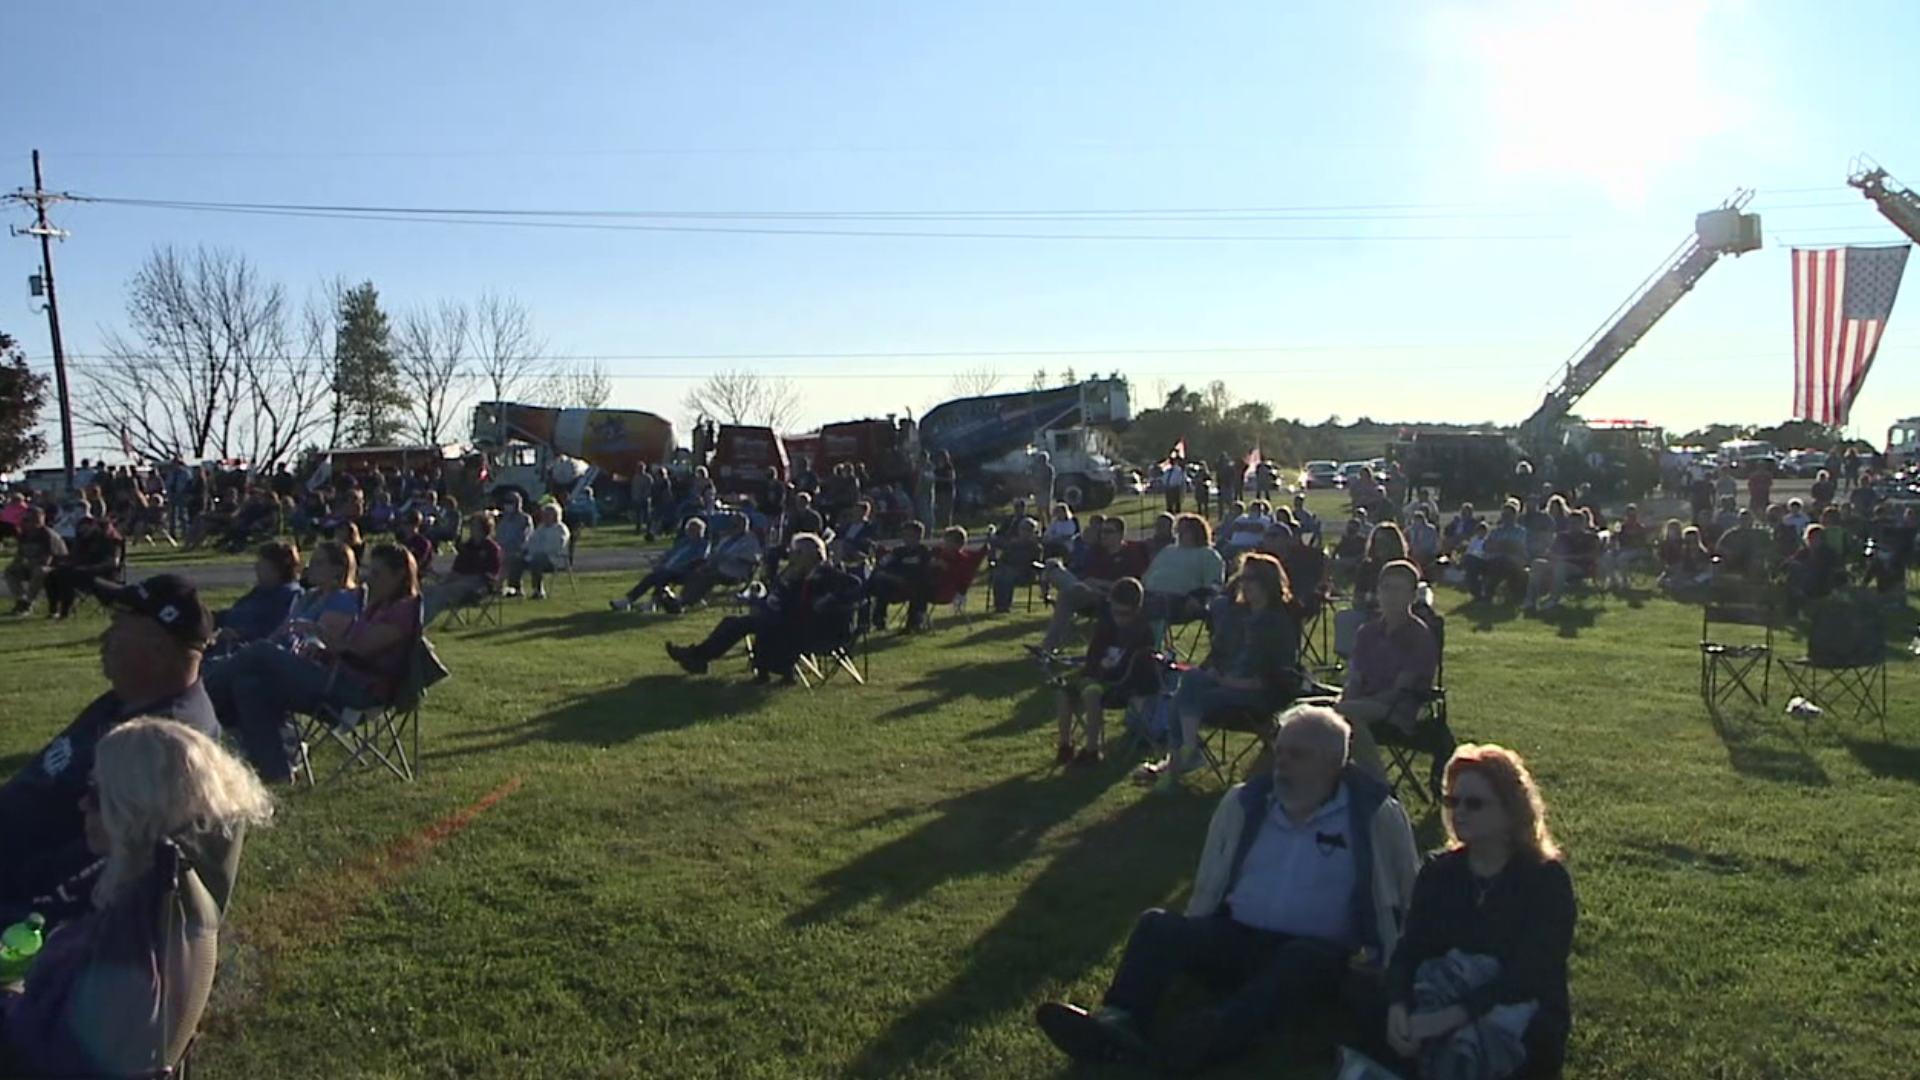 The annual service was held Friday at a park named after Danny Crisman.